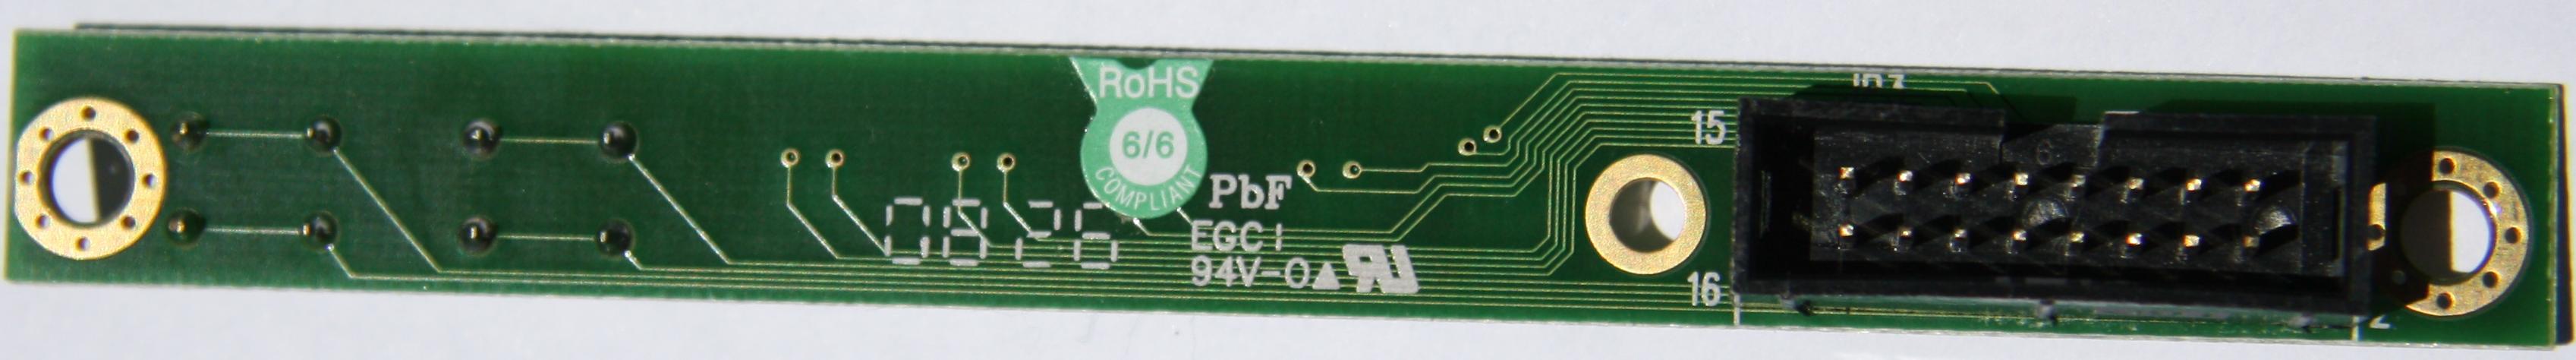 Supermicro FP512 REV3.00 Front Panel PCB (back)